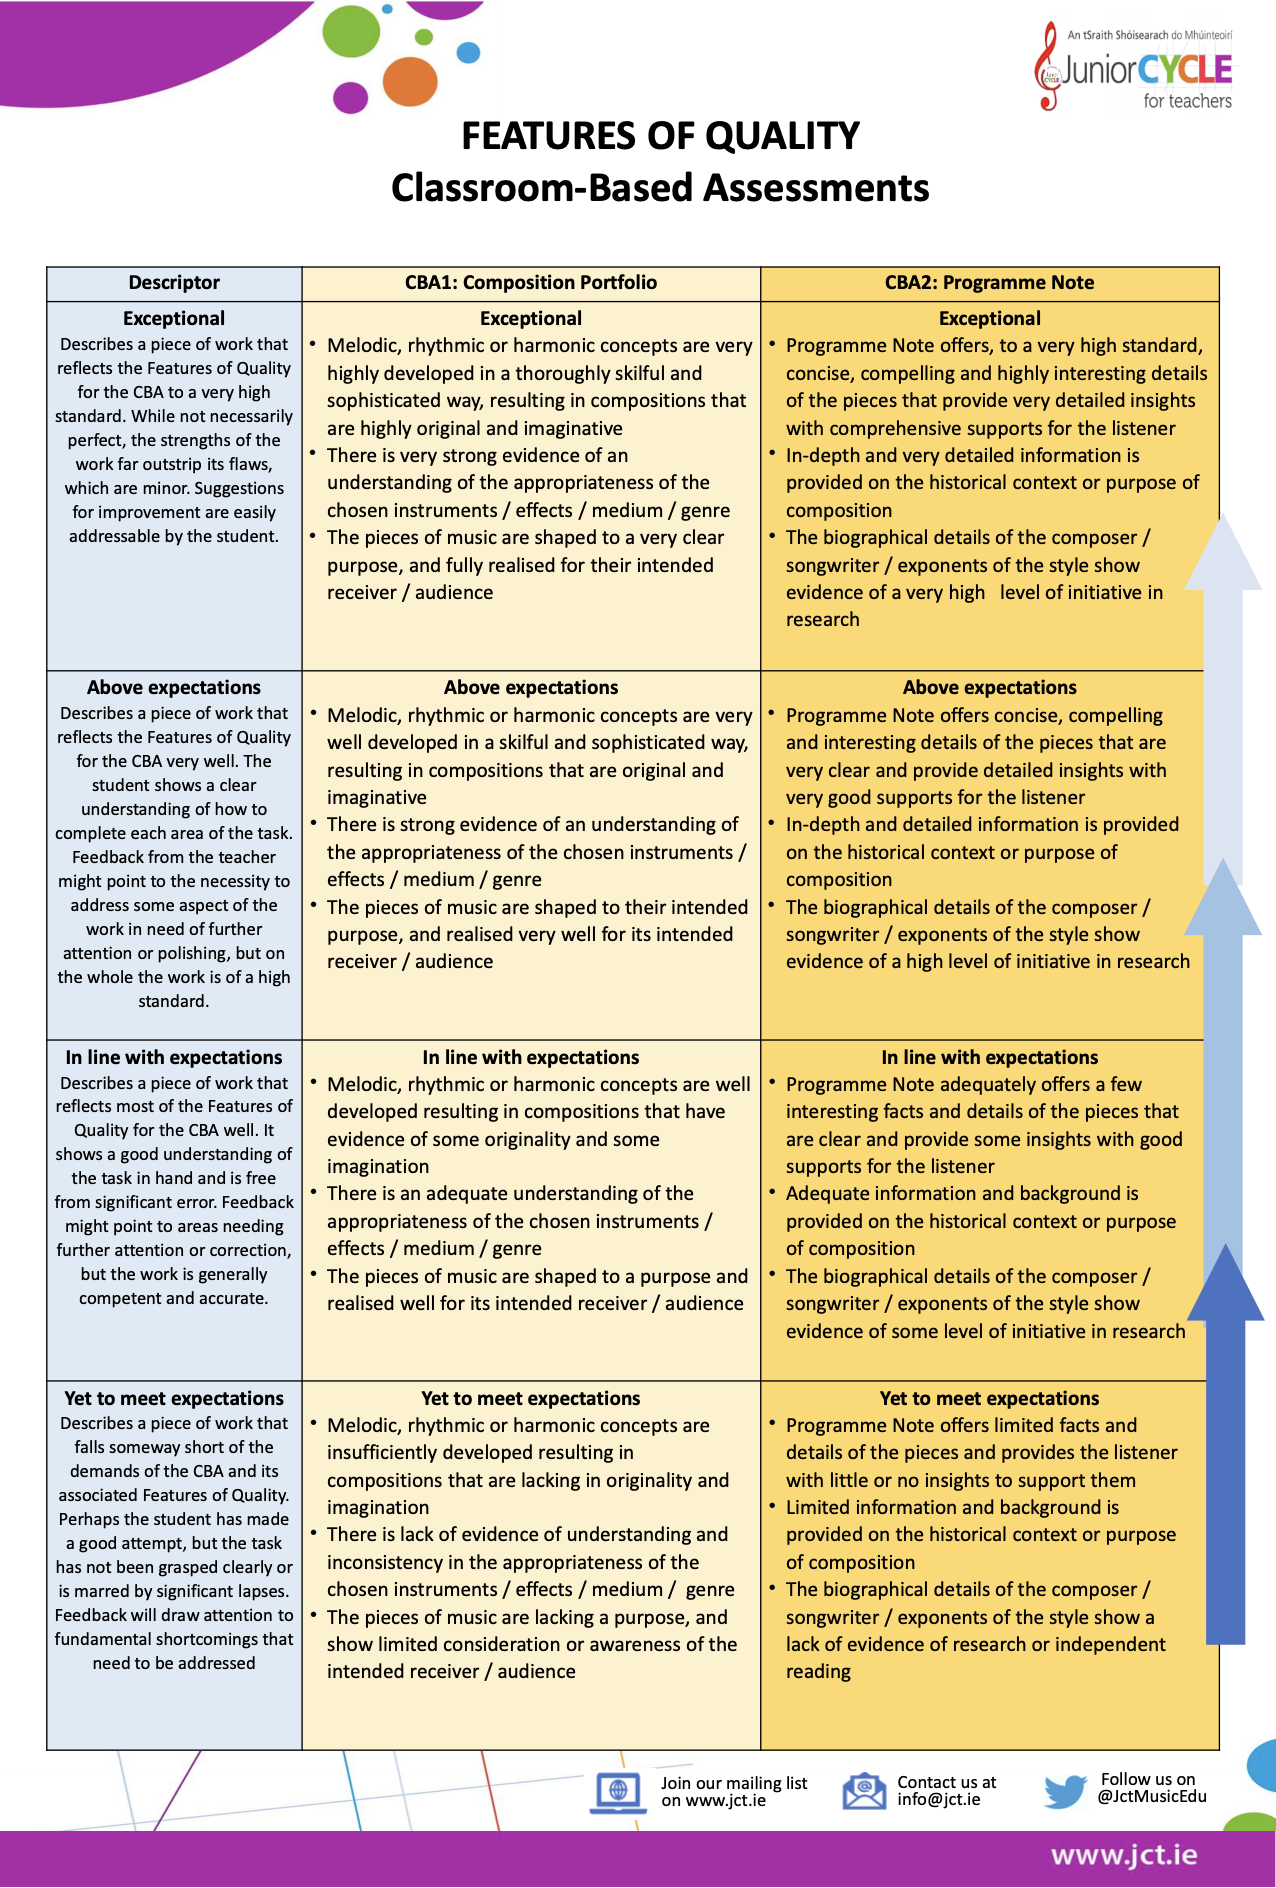 Features of Quality: Classroom-Based Assessments